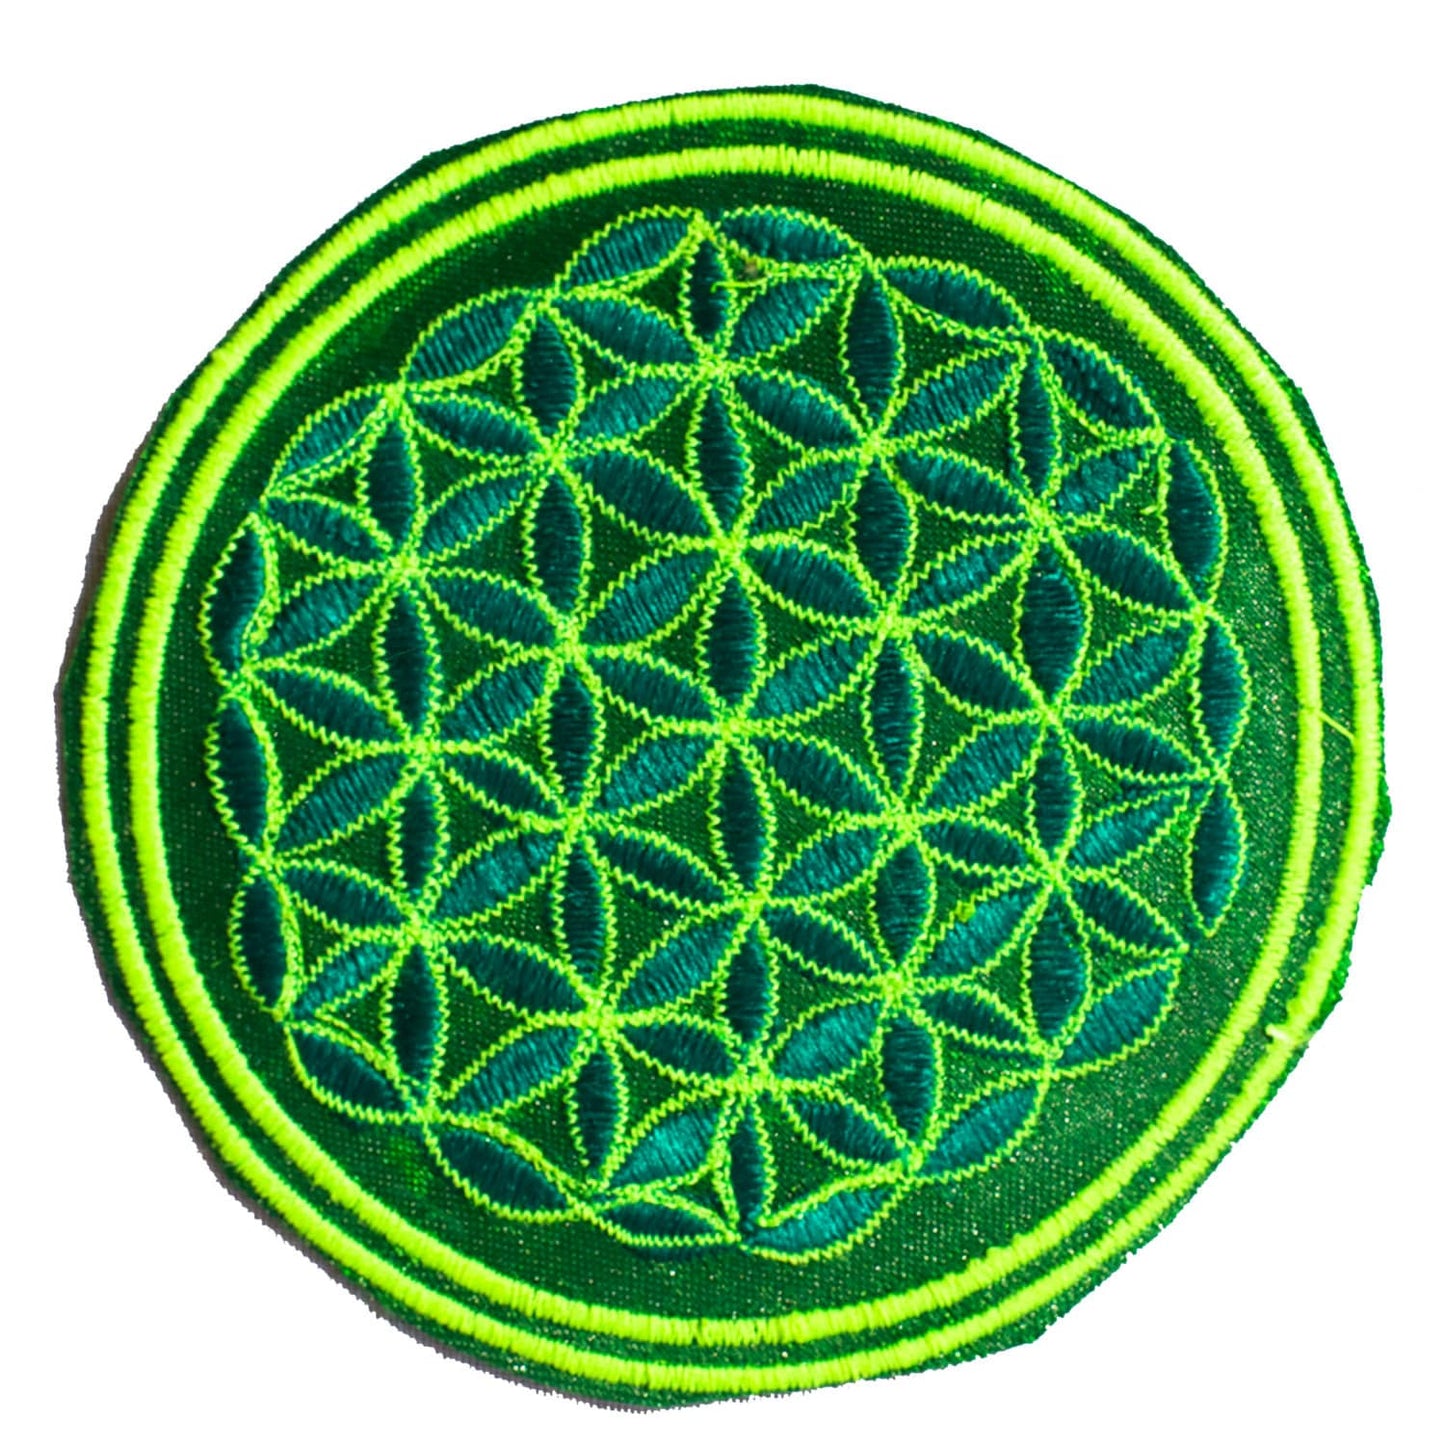 pink flower of life patch small size with variations